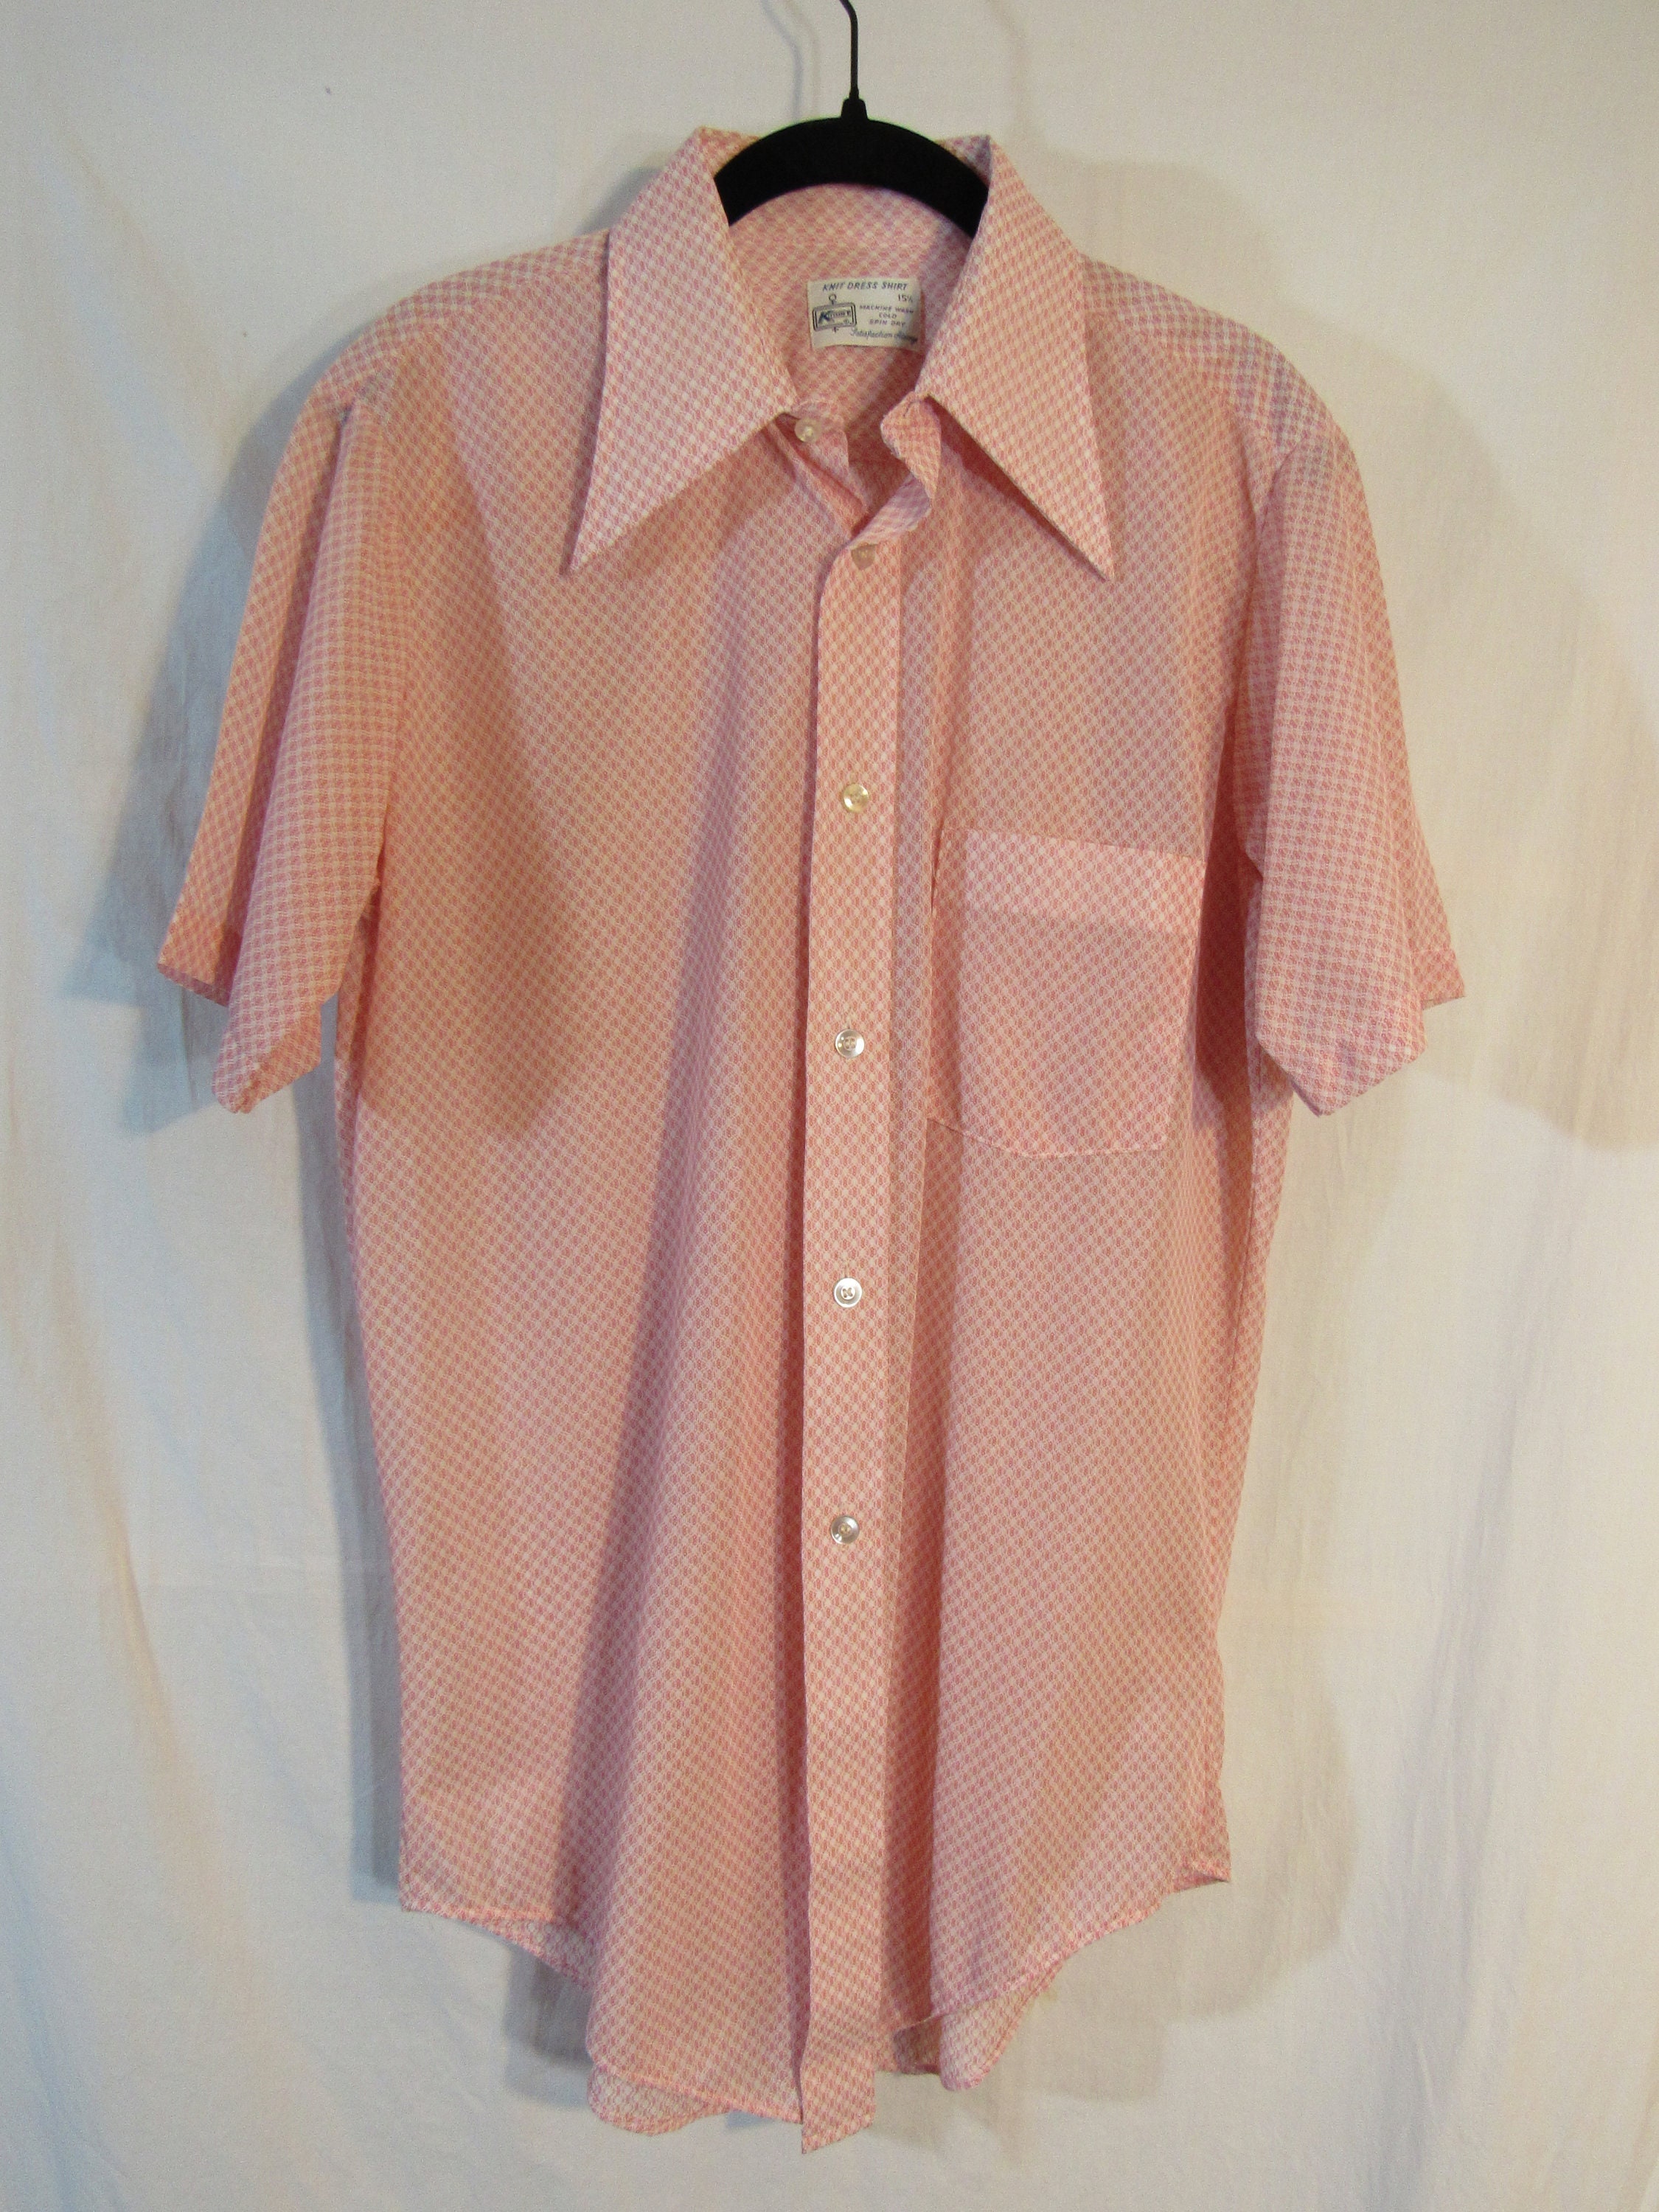 Vintage 1970s Unworn Kmart Knit Sheer Pink and White Polyester? Stylized  Check Pointy Collar Short Sleeve Shirt Men's 15 1/2 Chest 42